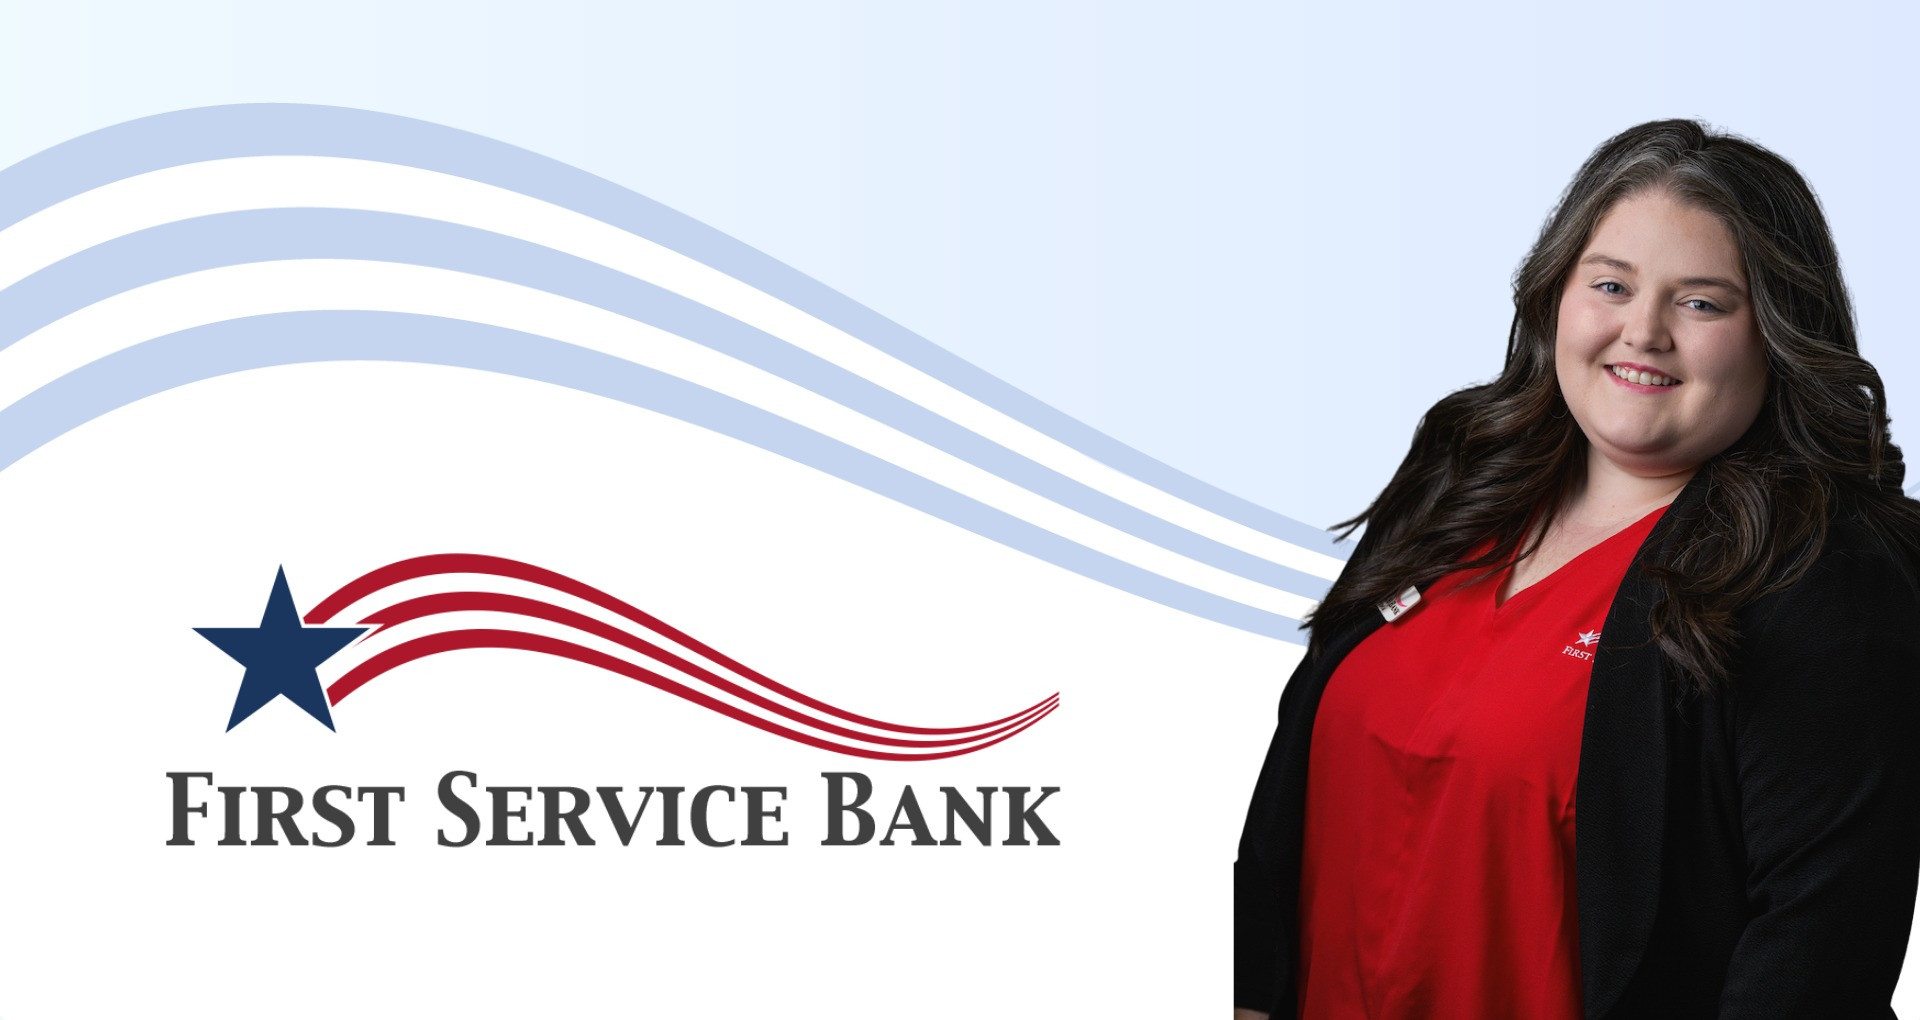 First Service Bank Announces Promotion of Samantha Richardson to Assistant Branch Manager